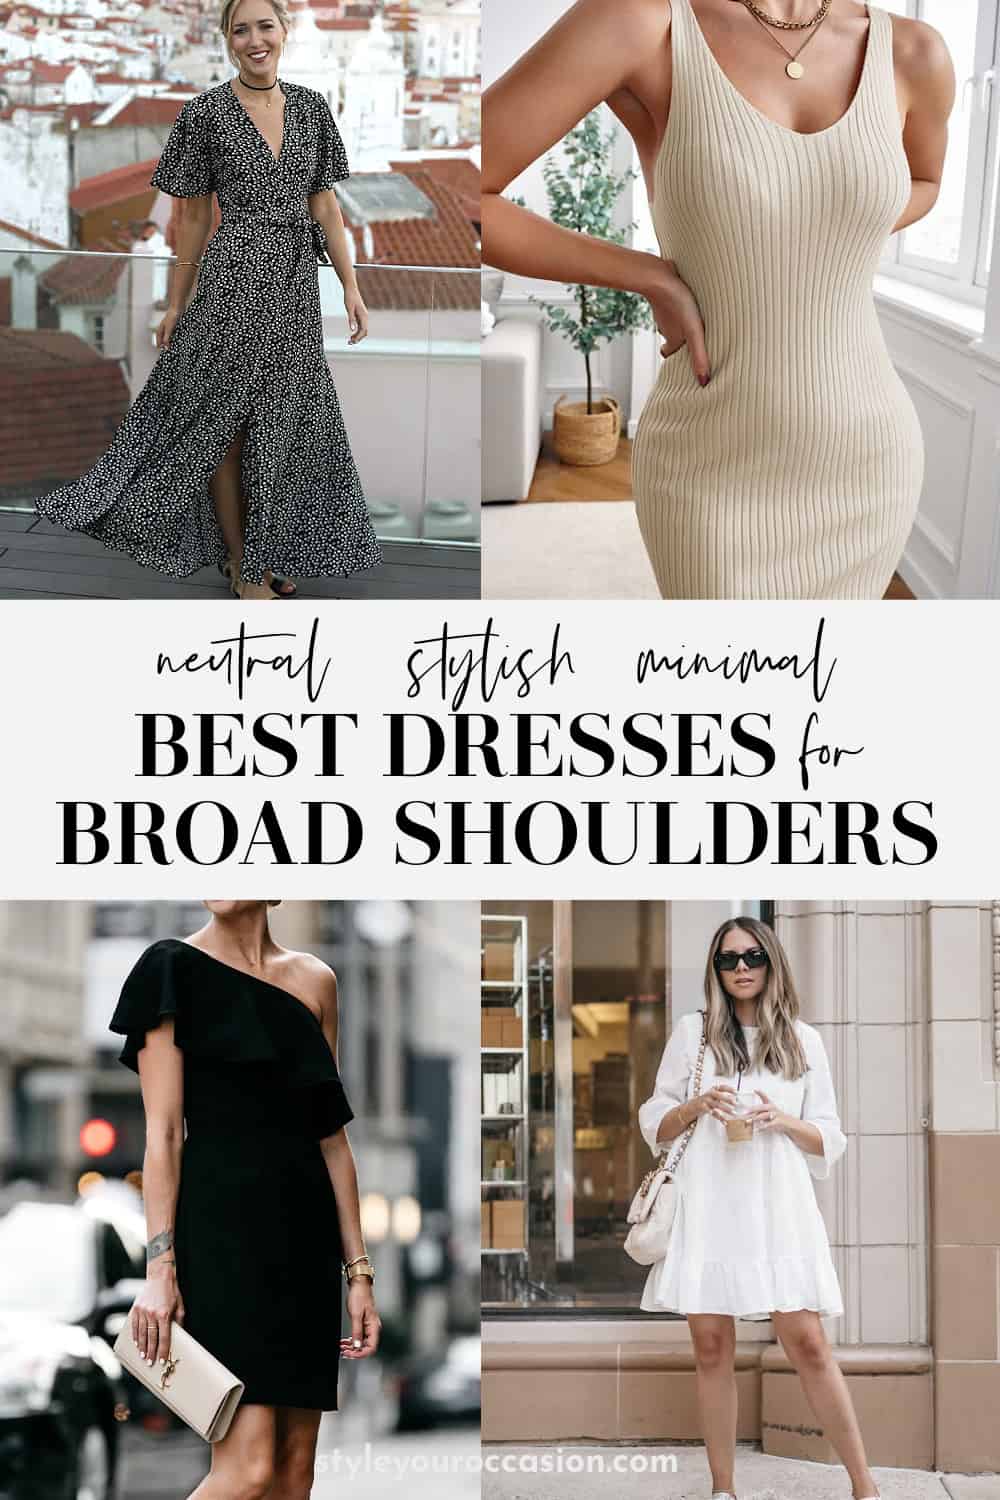 Dresses for Broad Shoulders: The Best Styles To Choose